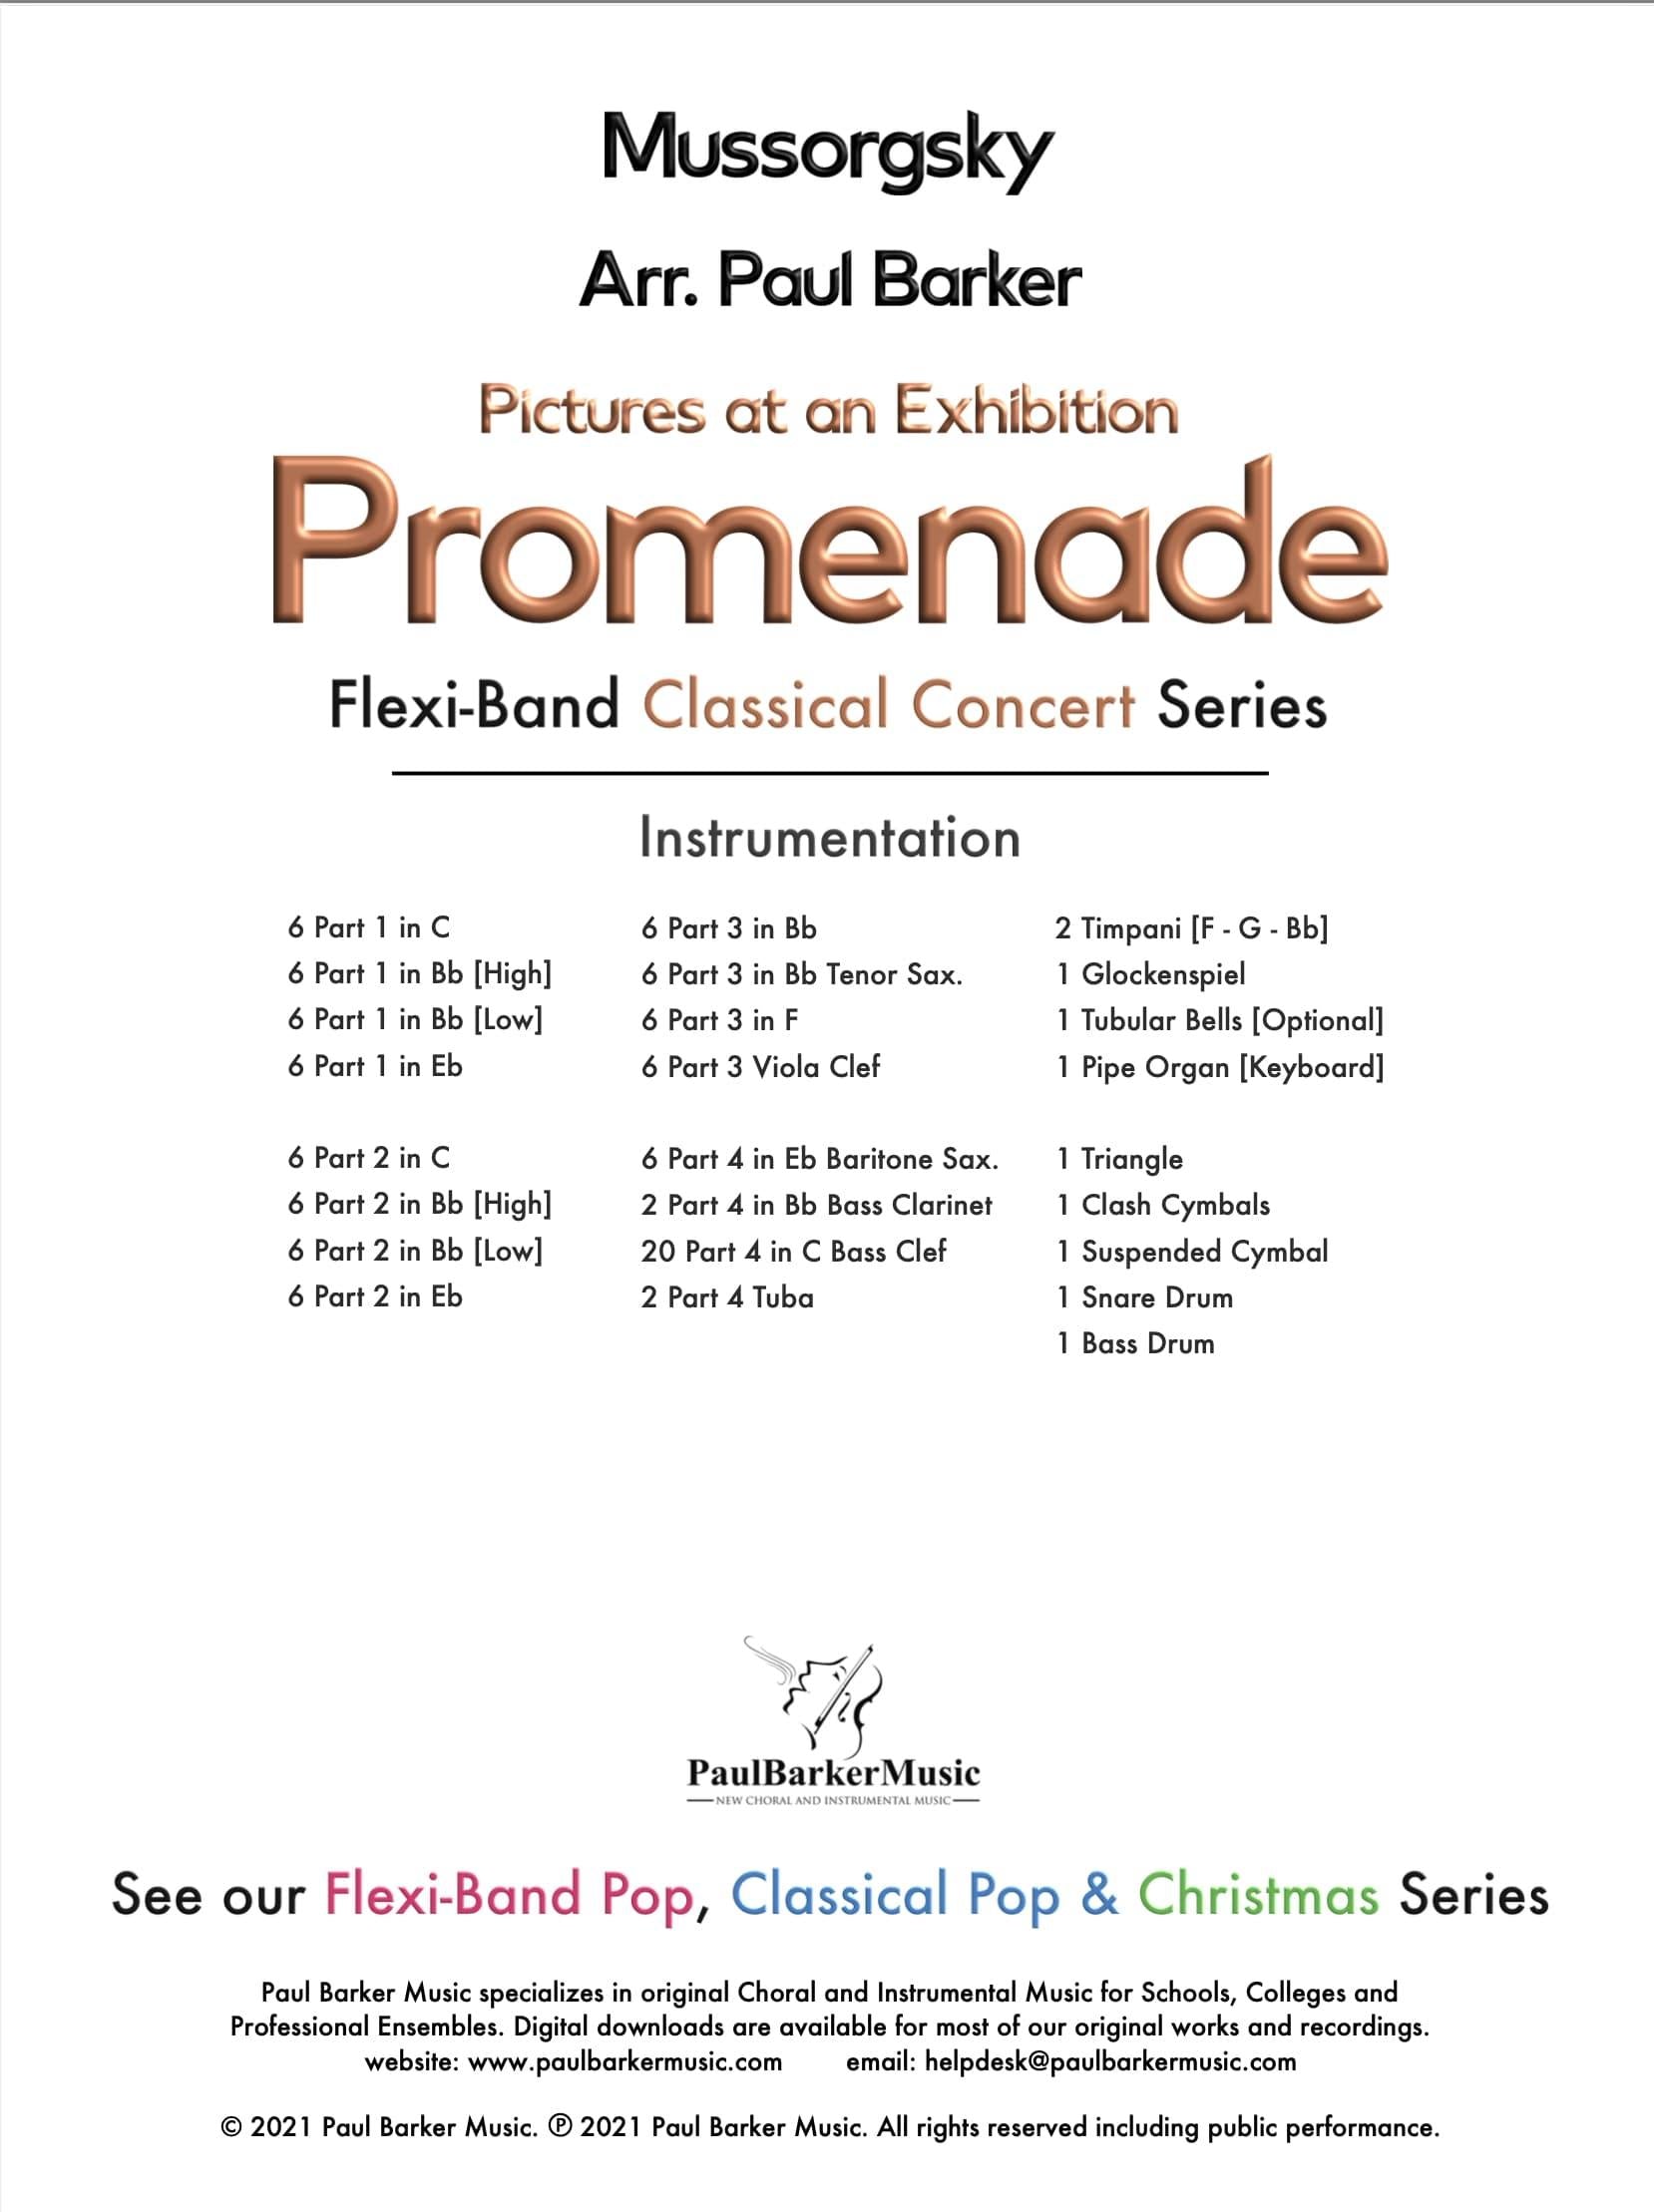 Pictures at an Exhibition [Promenade] - Paul Barker Music 